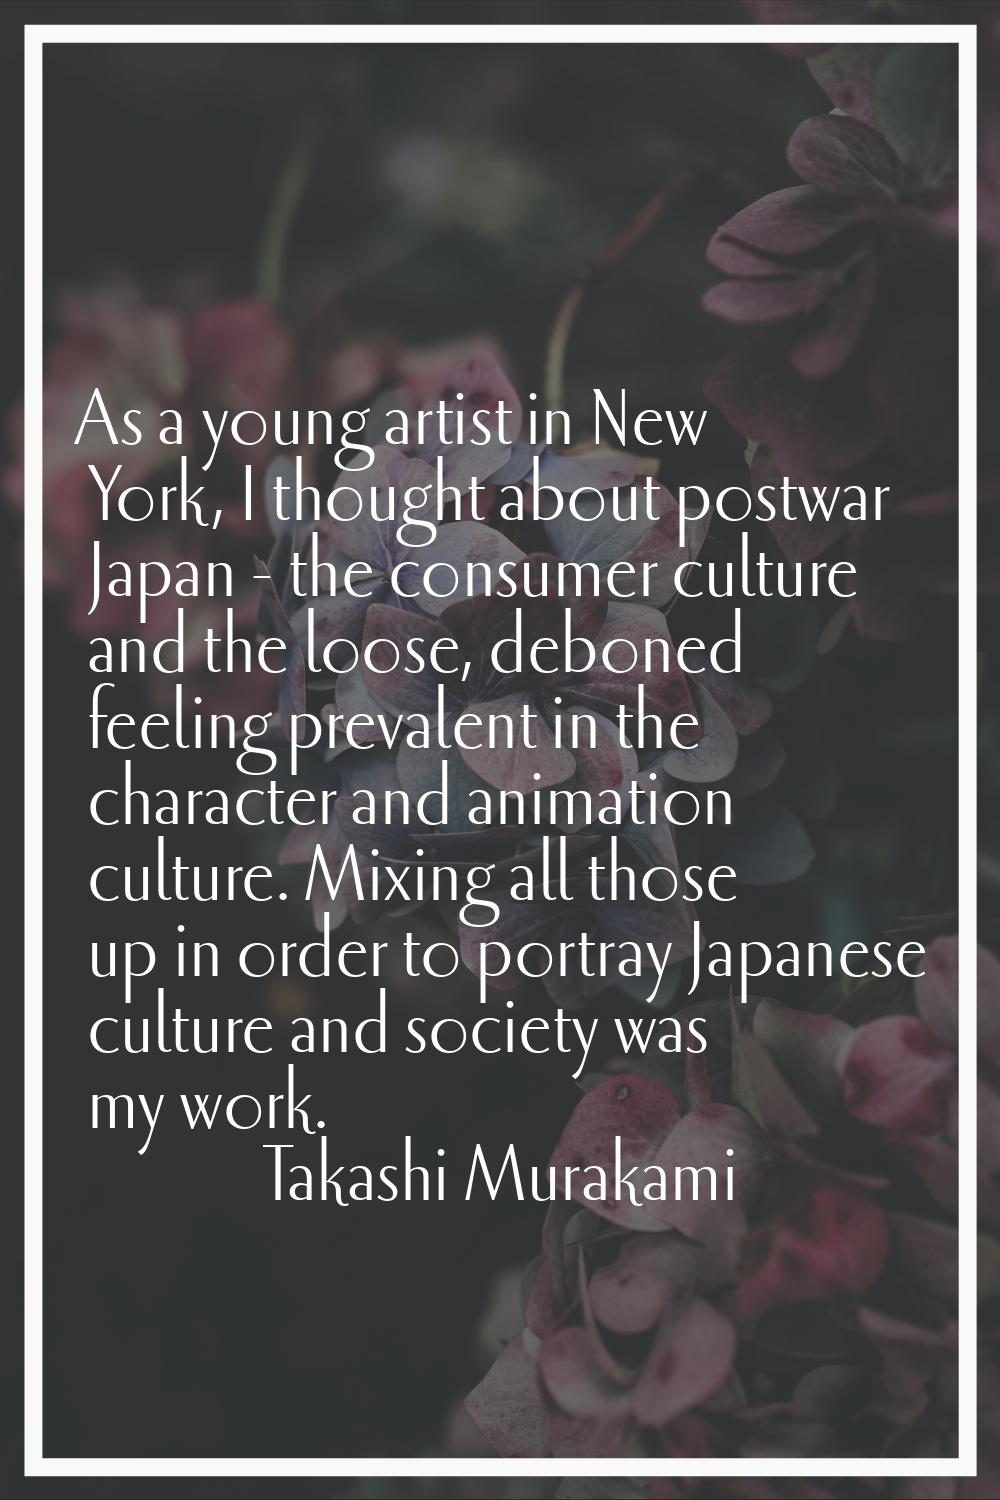 As a young artist in New York, I thought about postwar Japan - the consumer culture and the loose, 